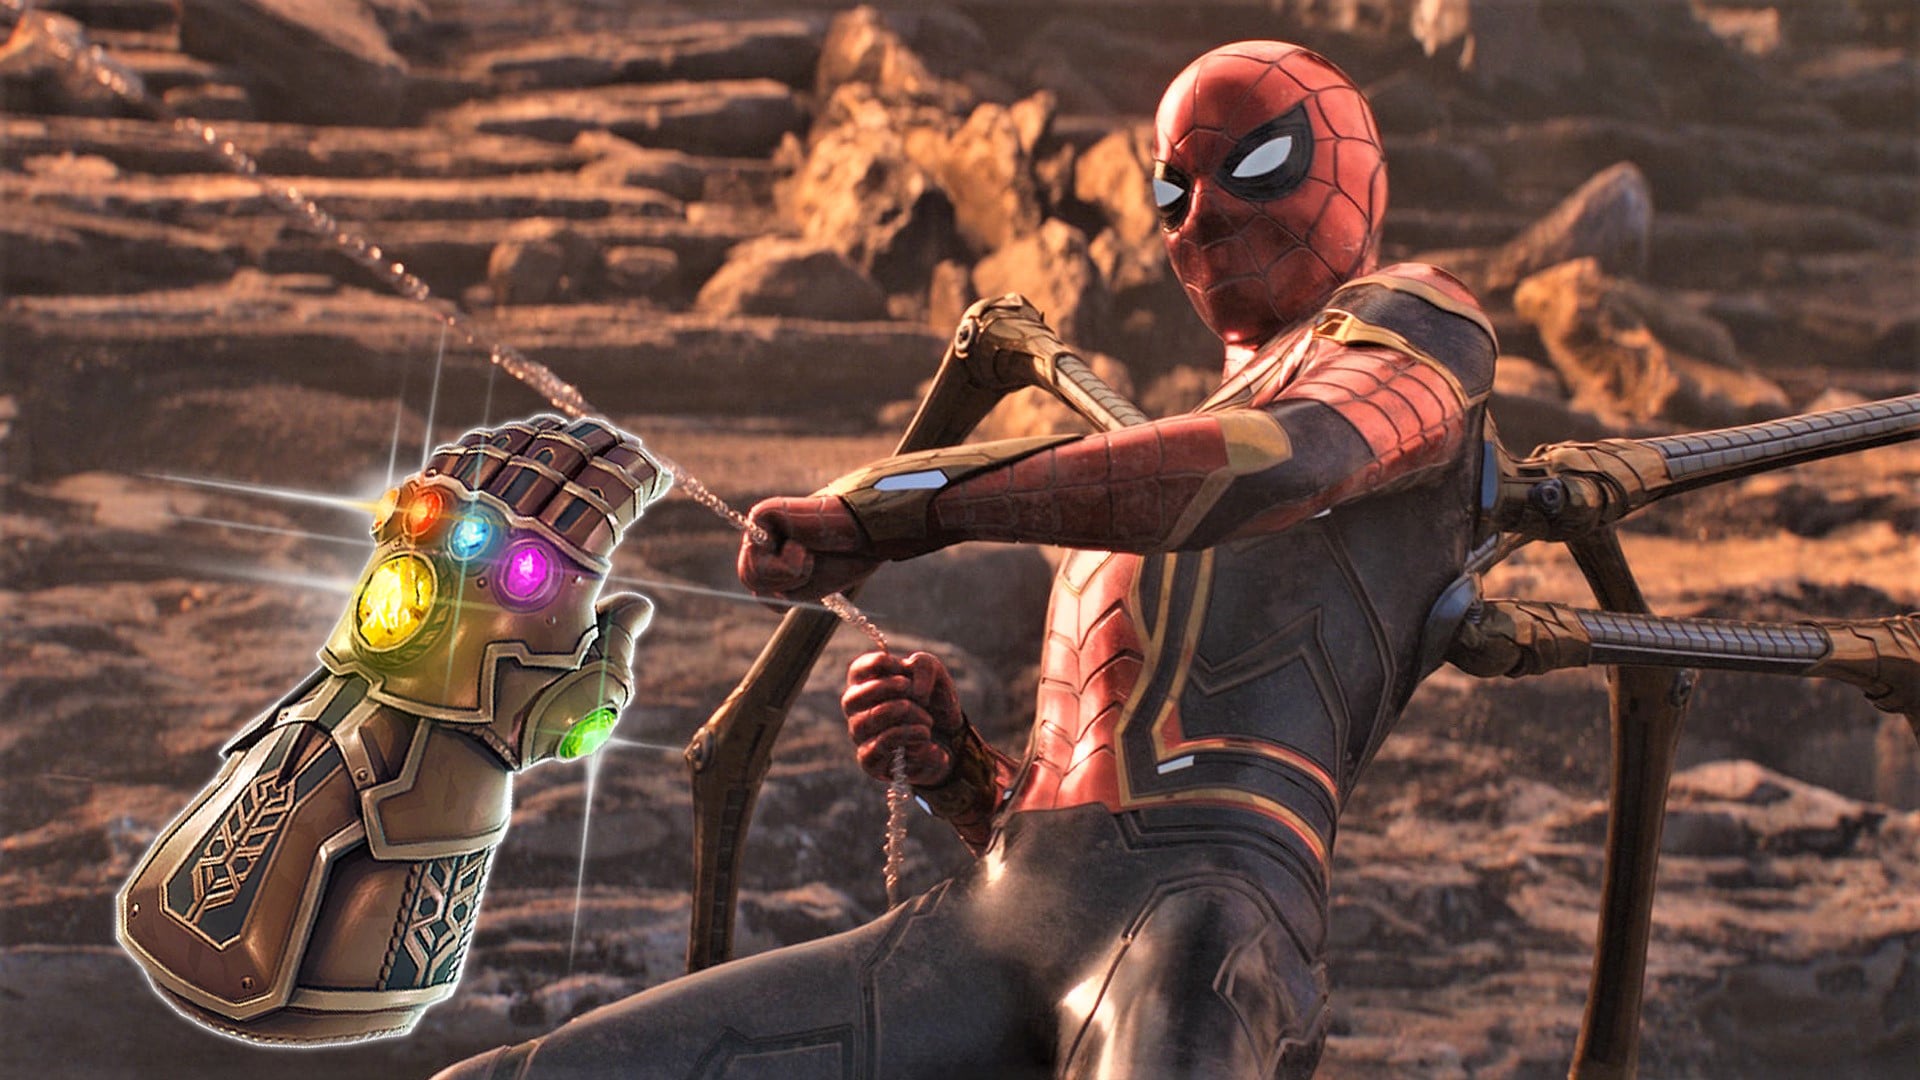 Infinity War Screen Capture Shows How Close Spider-Man Was To Getting The Gauntlet Off Thanos